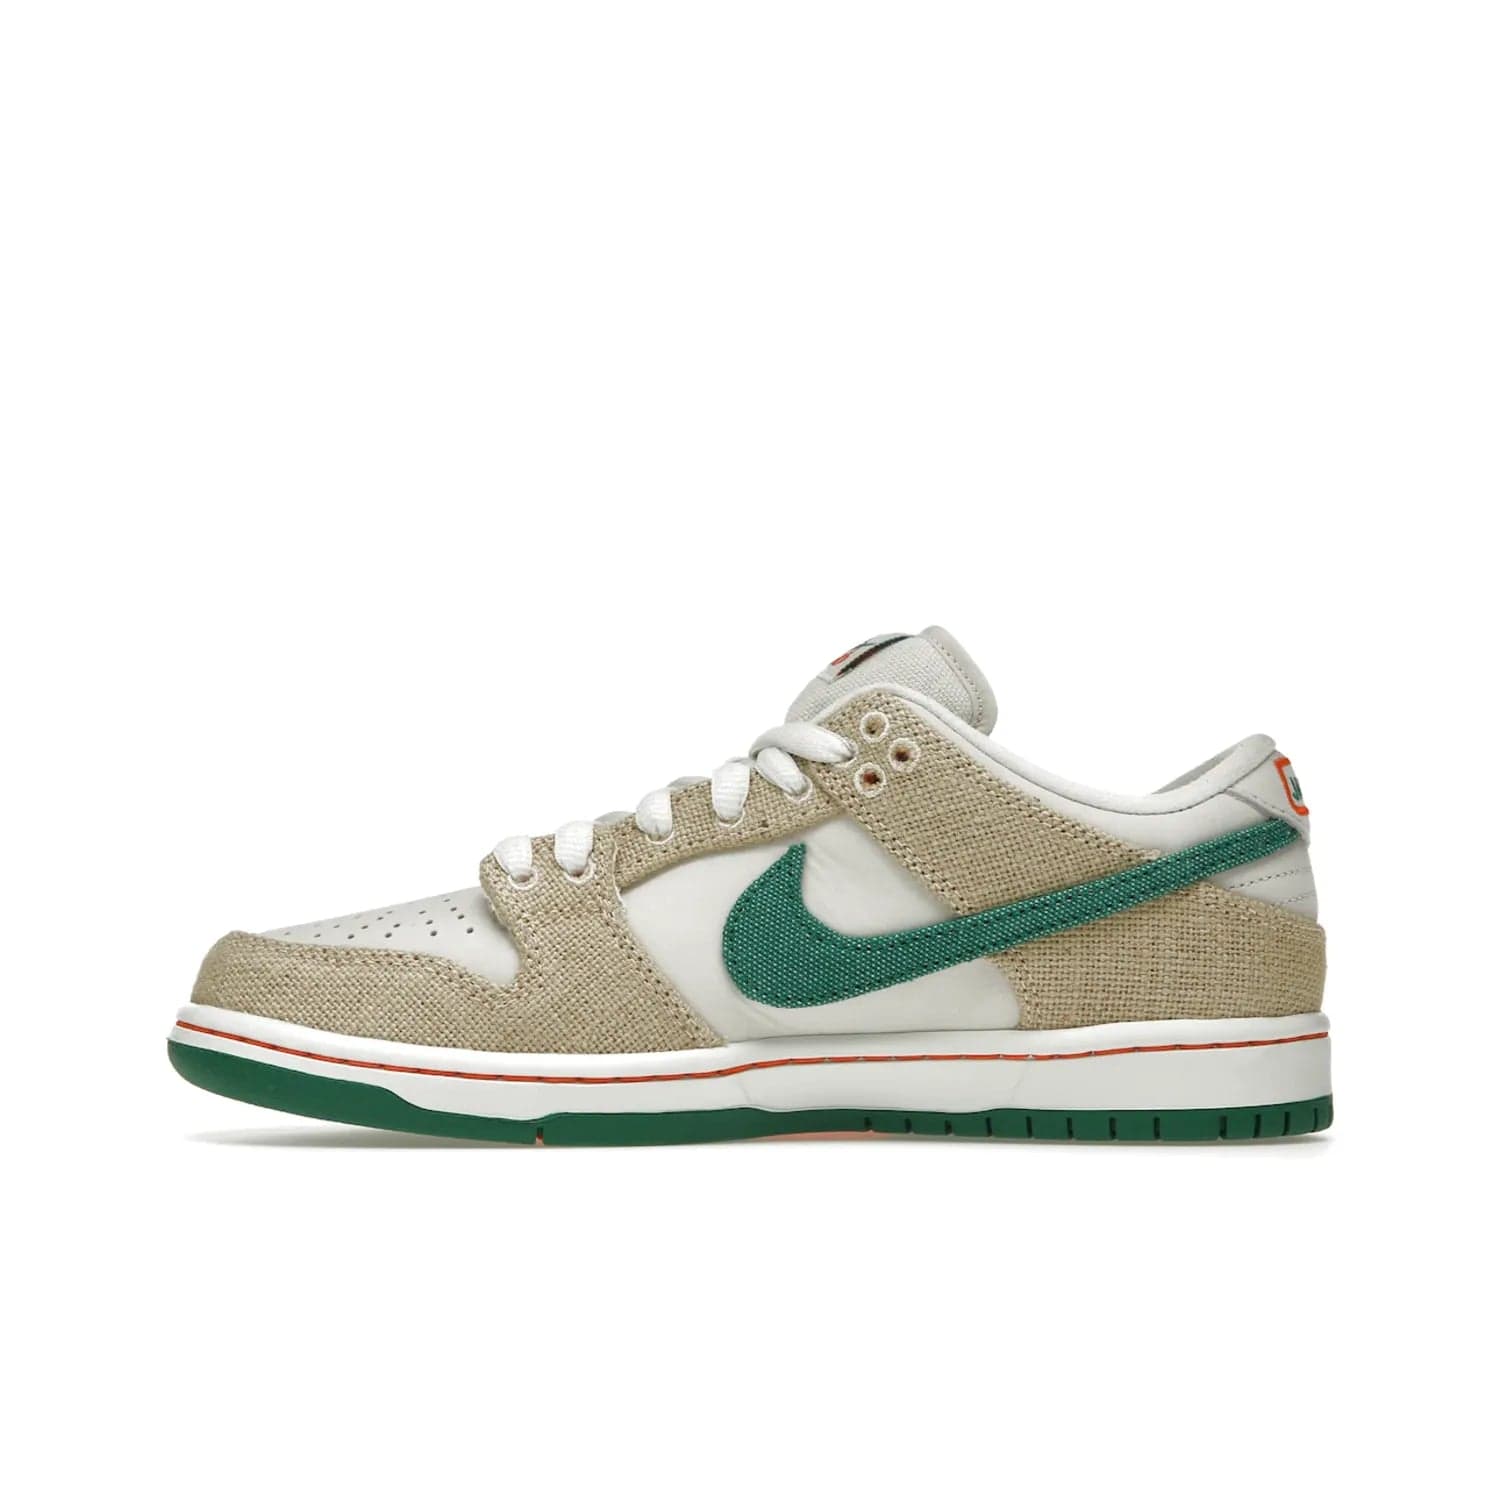 Nike SB Dunk Low Jarritos - Image 19 - Only at www.BallersClubKickz.com - Shop limited edition Nike SB Dunk Low Jarritos! Crafted with white leather and tear-away canvas materials with green accents. Includes orange, green, and white laces to customize your look. Available now.